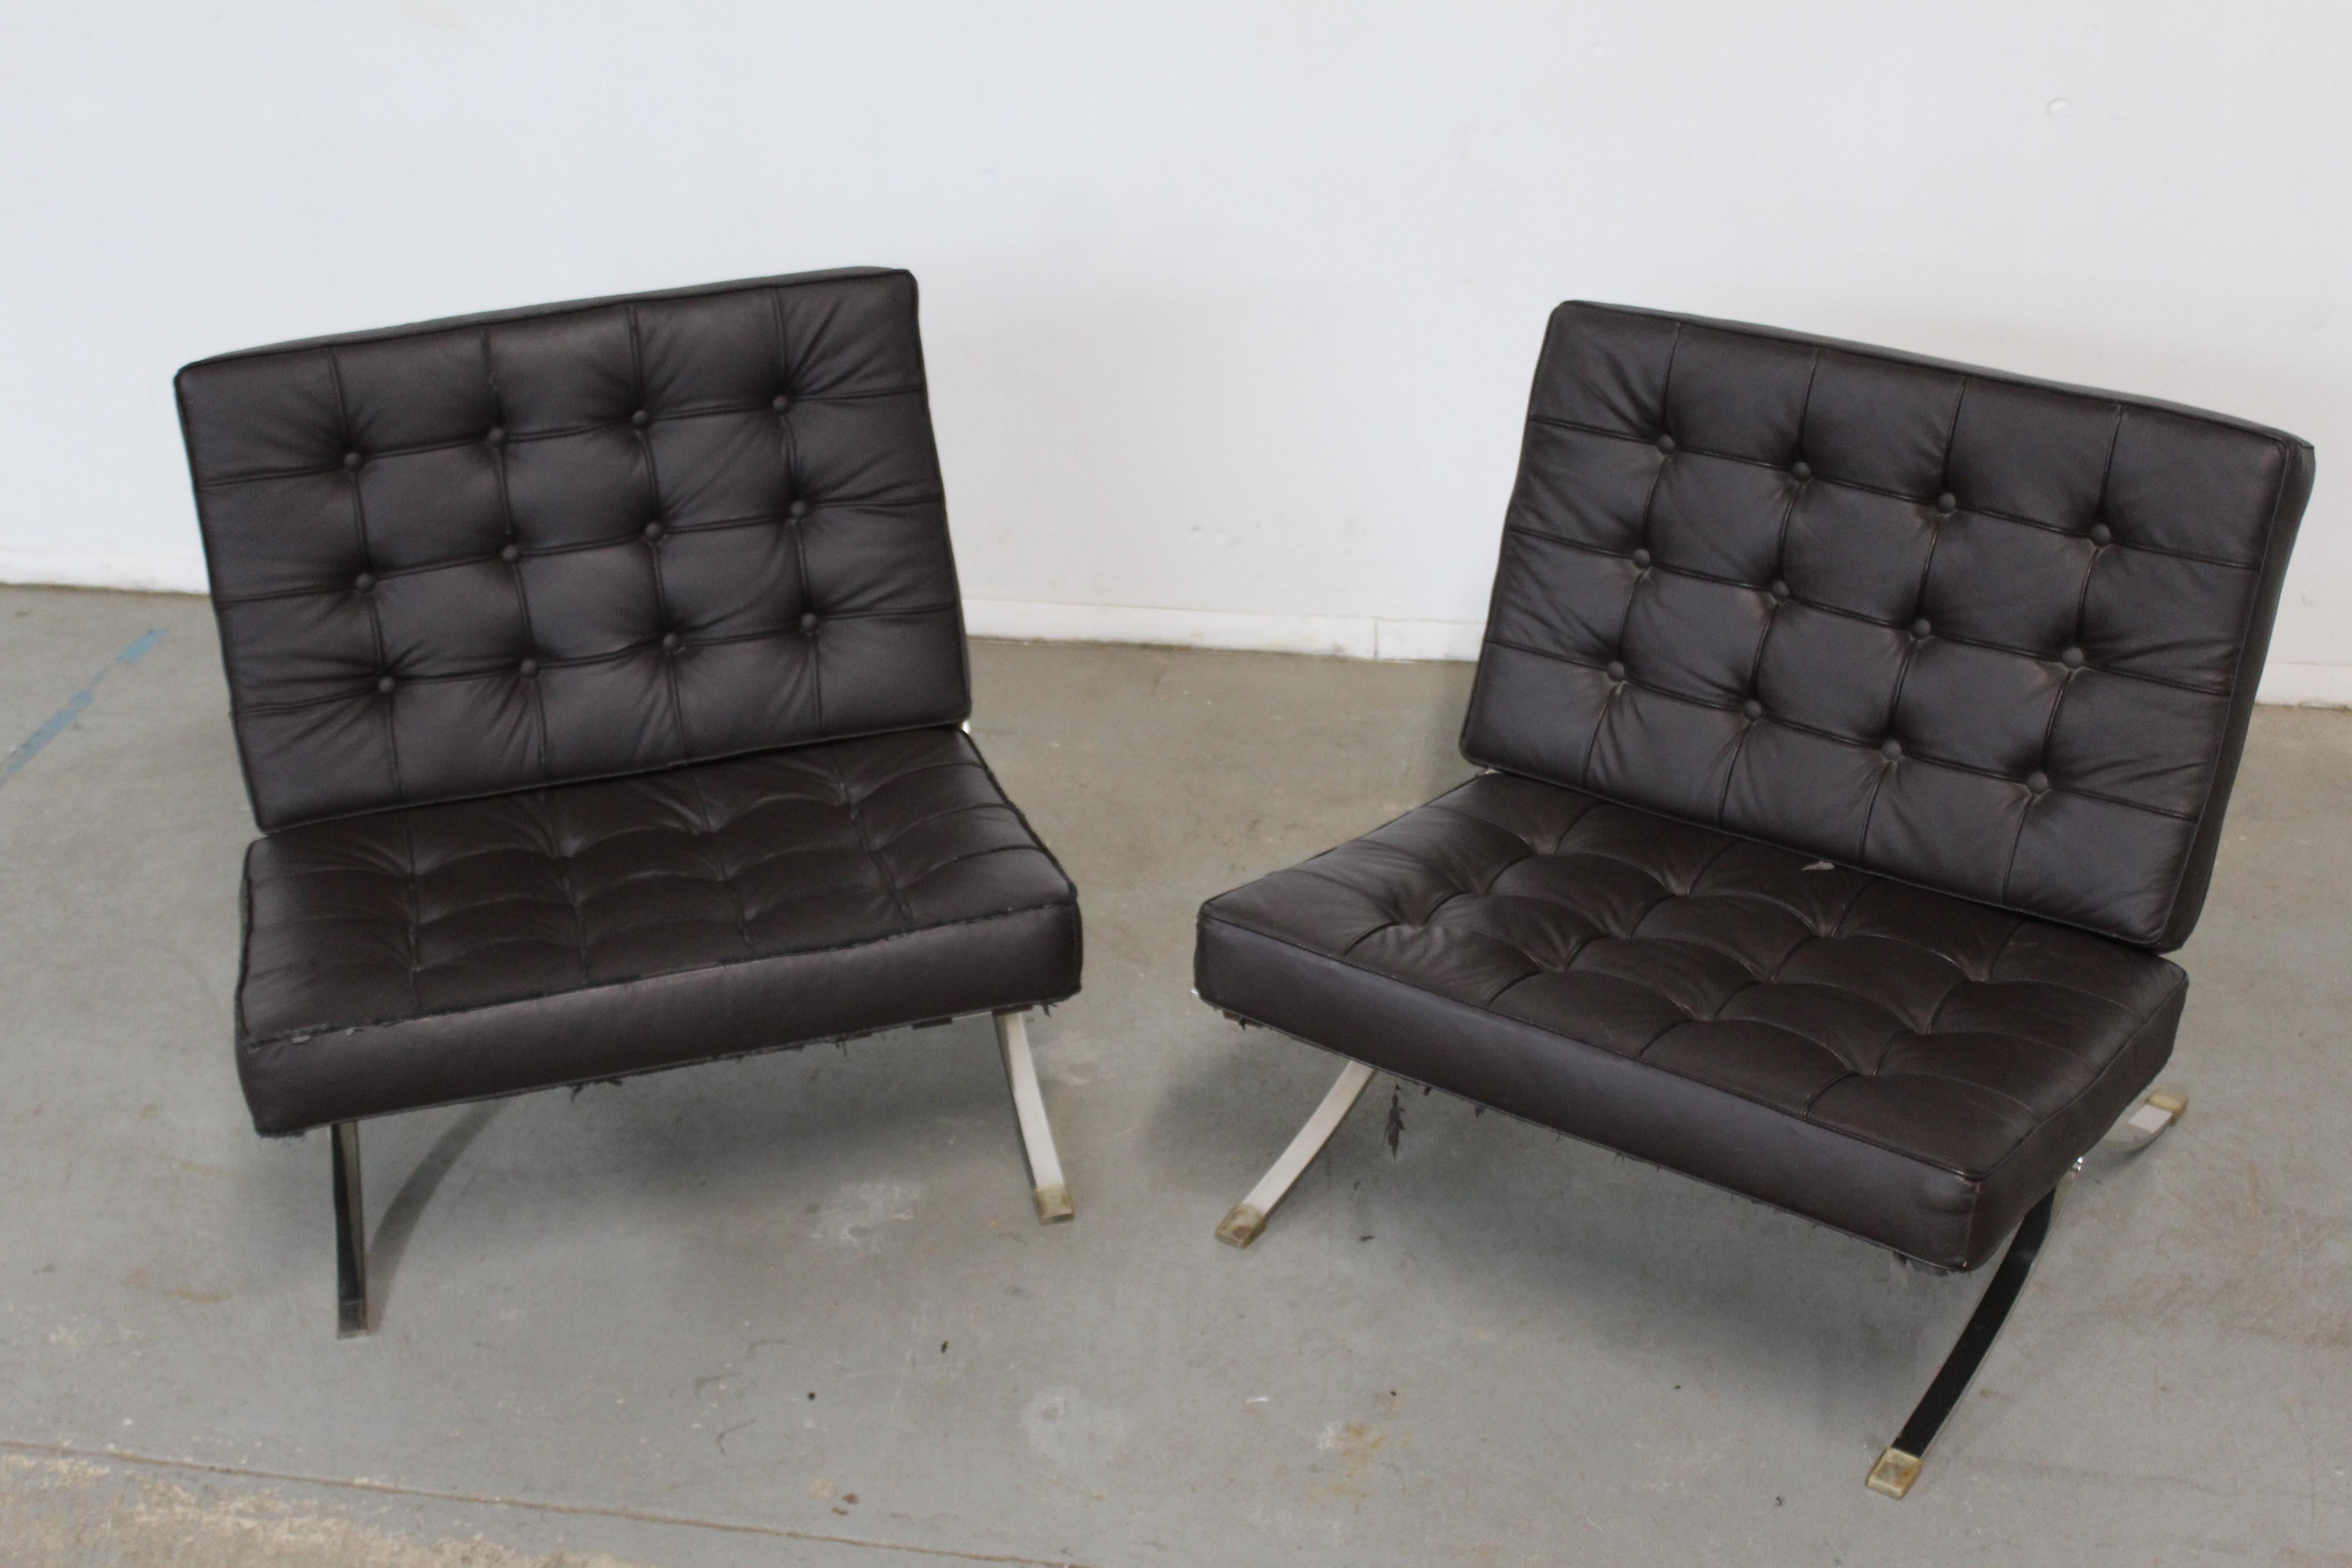 Pair of Vintage Mid-Century Modern Chrome Barcelona Style Lounge Chairs For Sale 12